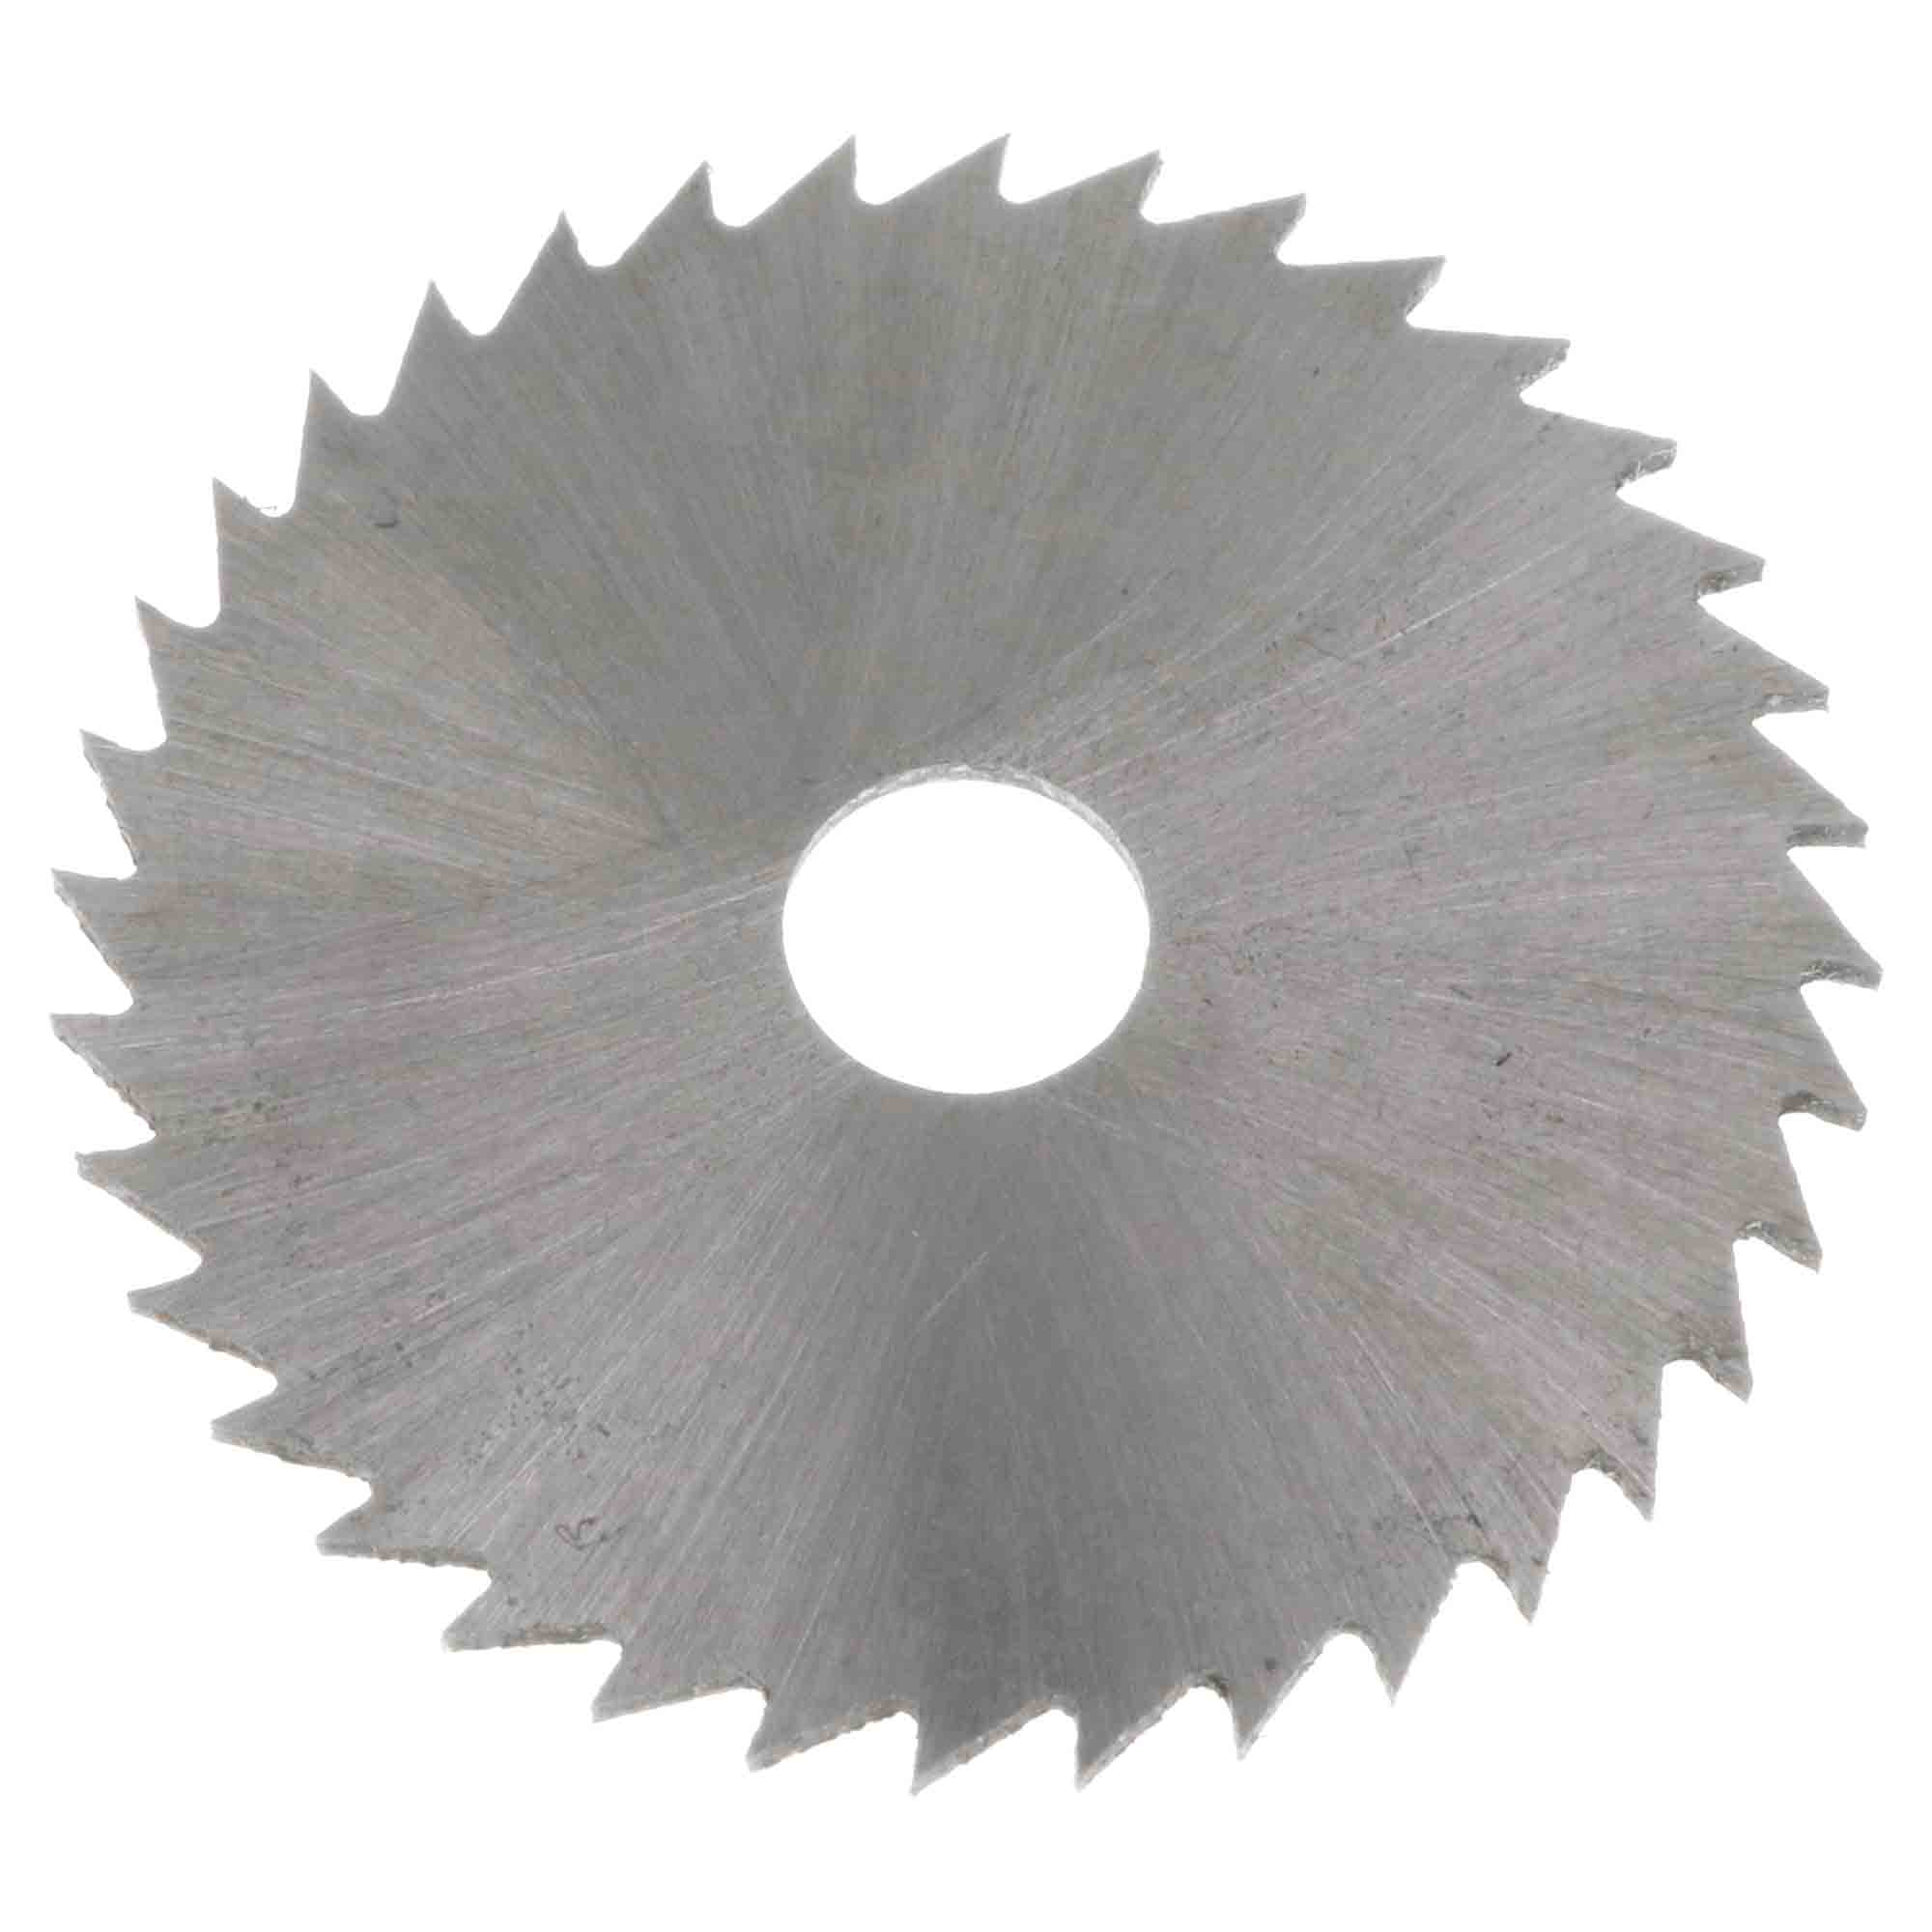 31.8mm - 1.25 inch Coarse HSS Saw Blade and Mandrel, 1/8 inch shank